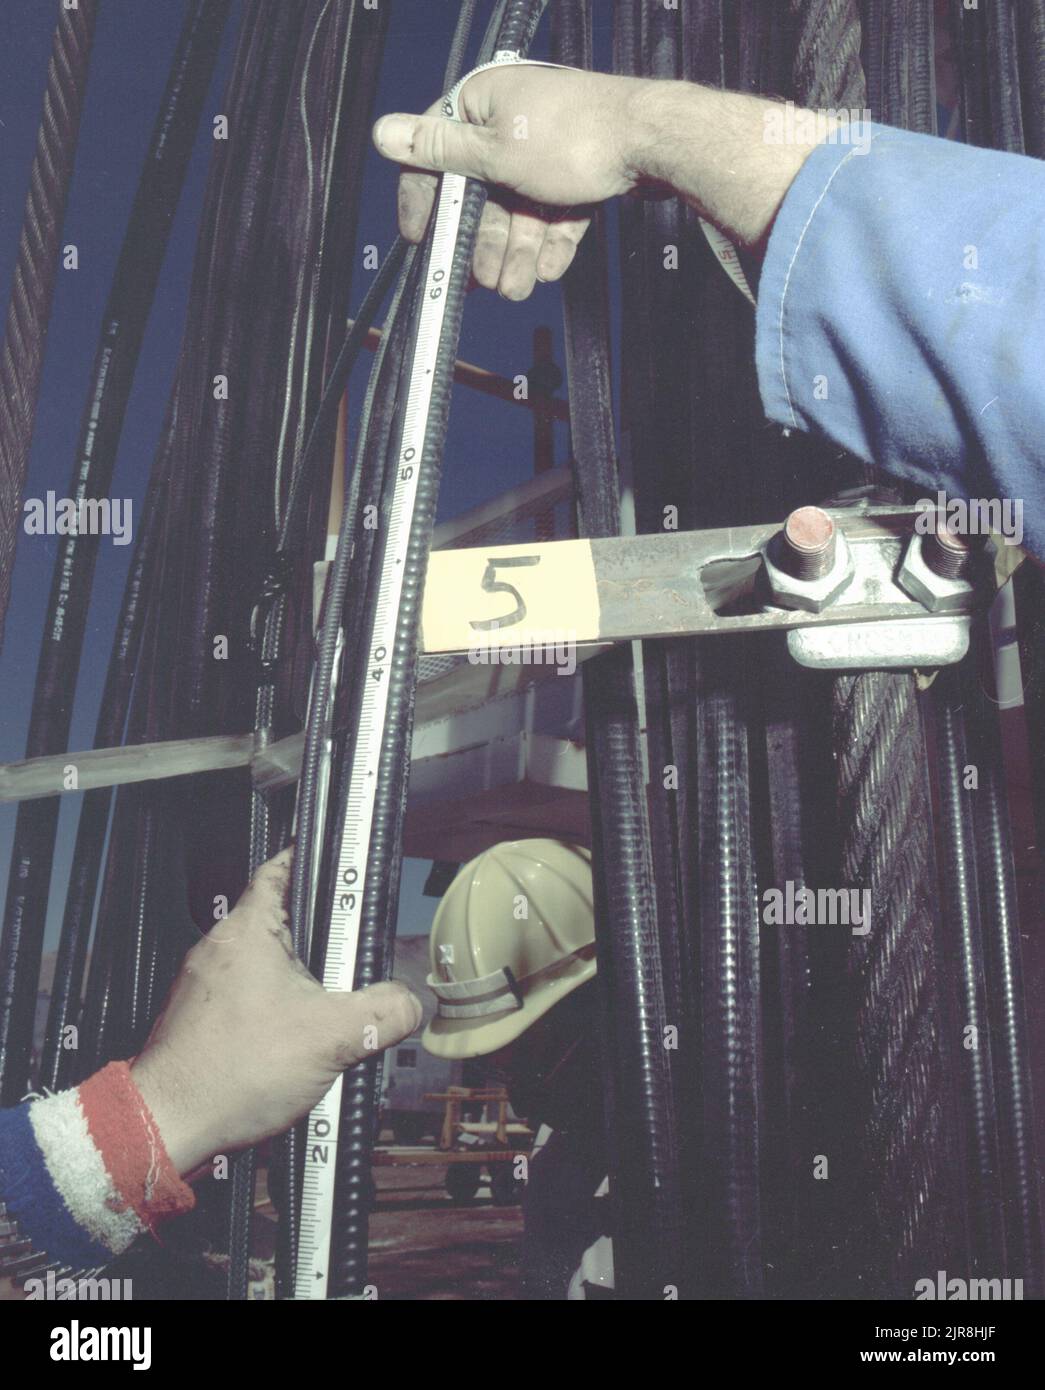 A771175 U7AE STRAKE DOWNHOLE OPERATION JOHN BROUILLARD (PROJECT ENGINEER) JUL 14 77 EG&G/NTS PHOTO LAB Publication Date: 7/14/1977  BROUILLARD, JOHN; CABLES, COAXIAL; CONSTRUCTION HATS; DOWNHOLE OPERATION; EDGERTON, GERMESHAUSEN & GRIER; EG&G; EQUIPMENT & INSTRUMENTS; INSTRUMENTS & EQUIPMENT; MEASURED; MEASUREMENT & RELATIONSHIP; MEASURING DEVICES (EXC UTENSIL; NEVADA; NEVADA TEST SITE; NTS; NUCLEAR ENERGY TECHNOLOGY; NUCLEAR TESTING; NUCLEAR TESTS; STRAKE; TAPE MEASURES; TEST SITES; UGT; UNDERGROUND TESTING  historical images. 1972 - 2012. Department of Energy. National Nuclear Security Admin Stock Photo